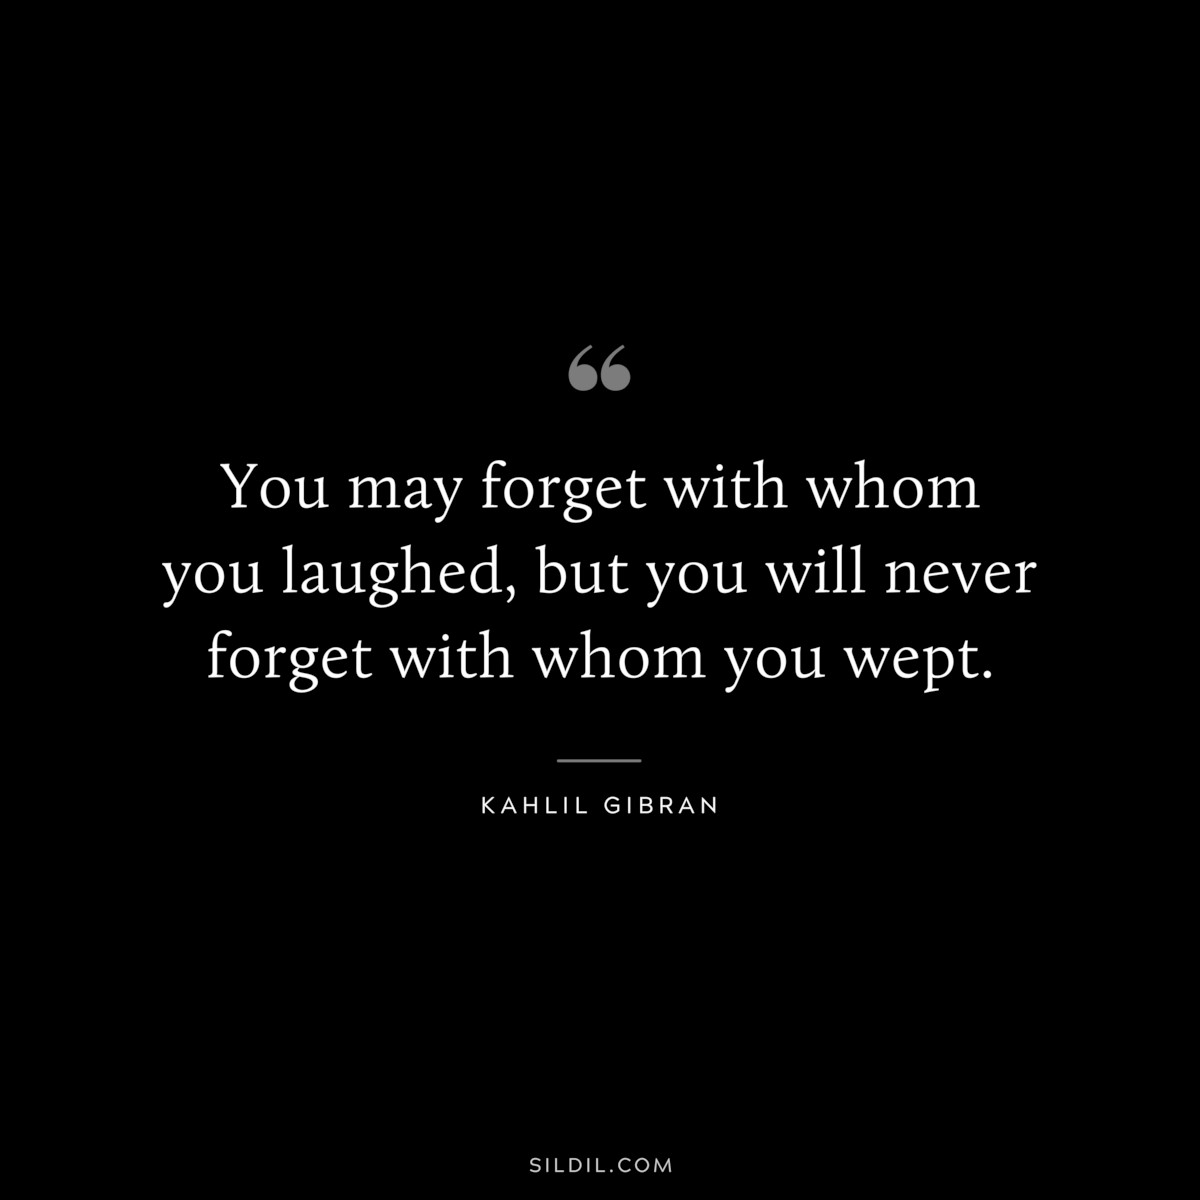 You may forget with whom you laughed, but you will never forget with whom you wept. ― Kahlil Gibran